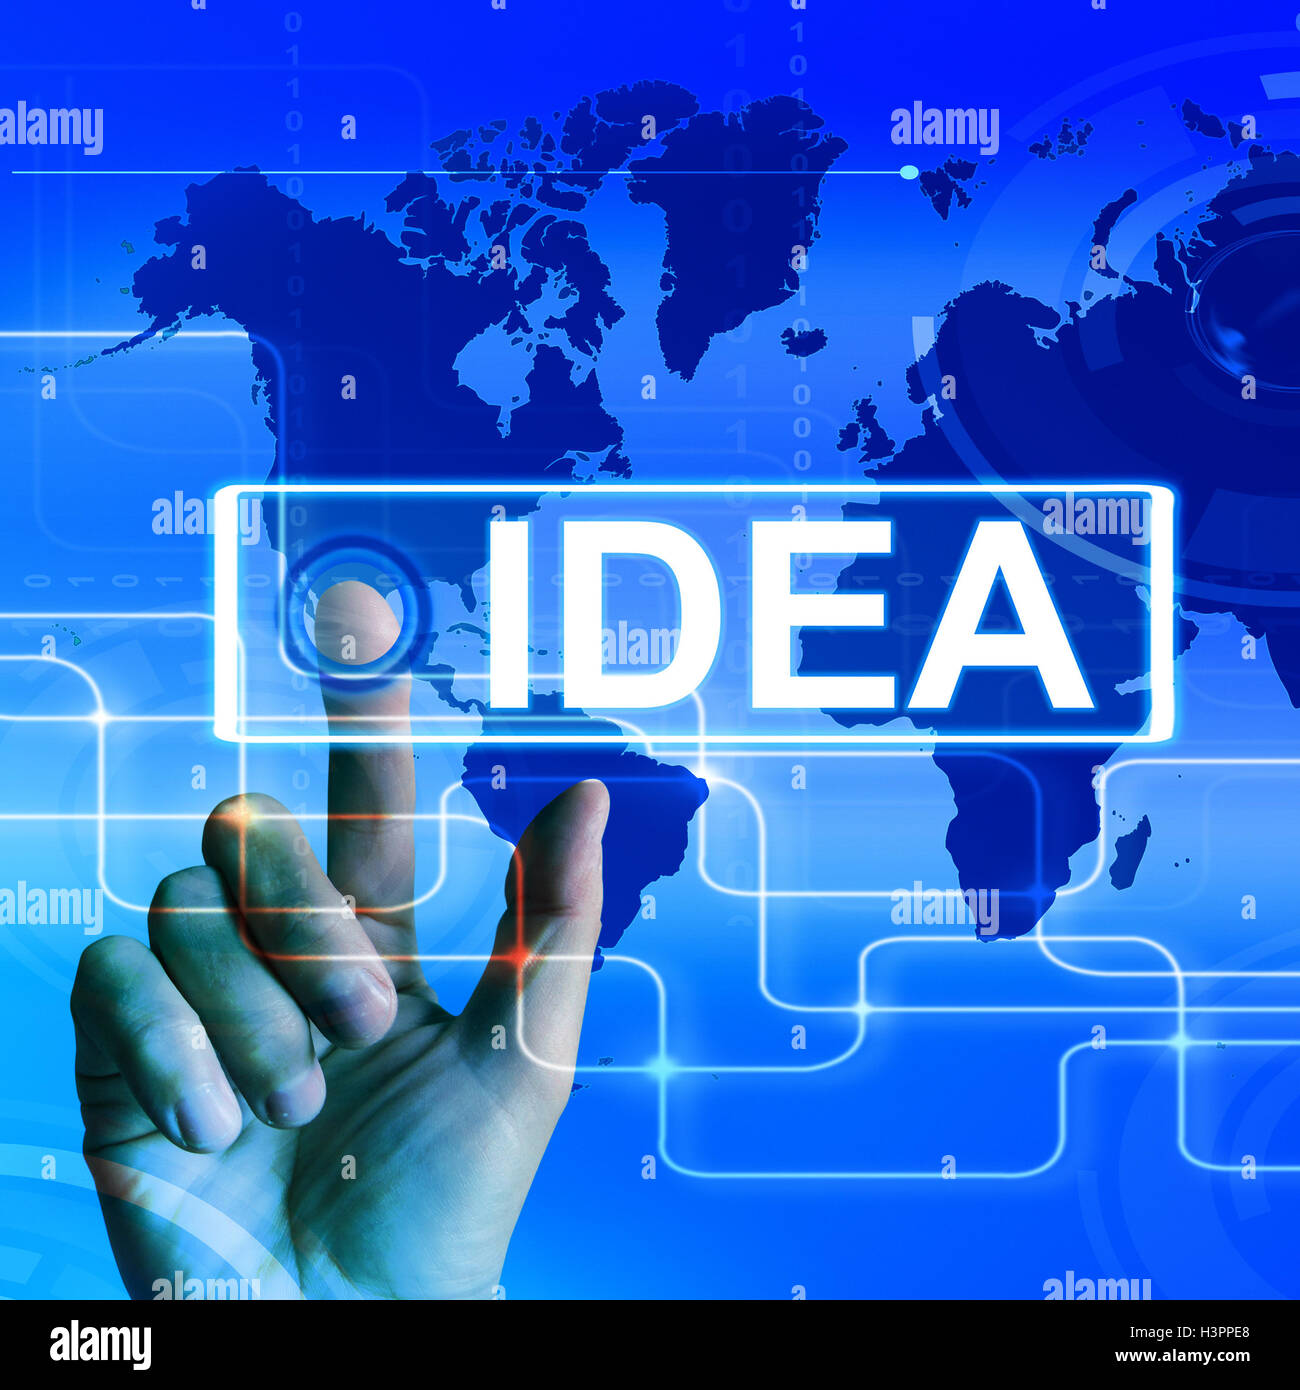 Idea Map Displays Worldwide Concept Thought or Ideas Stock Photo